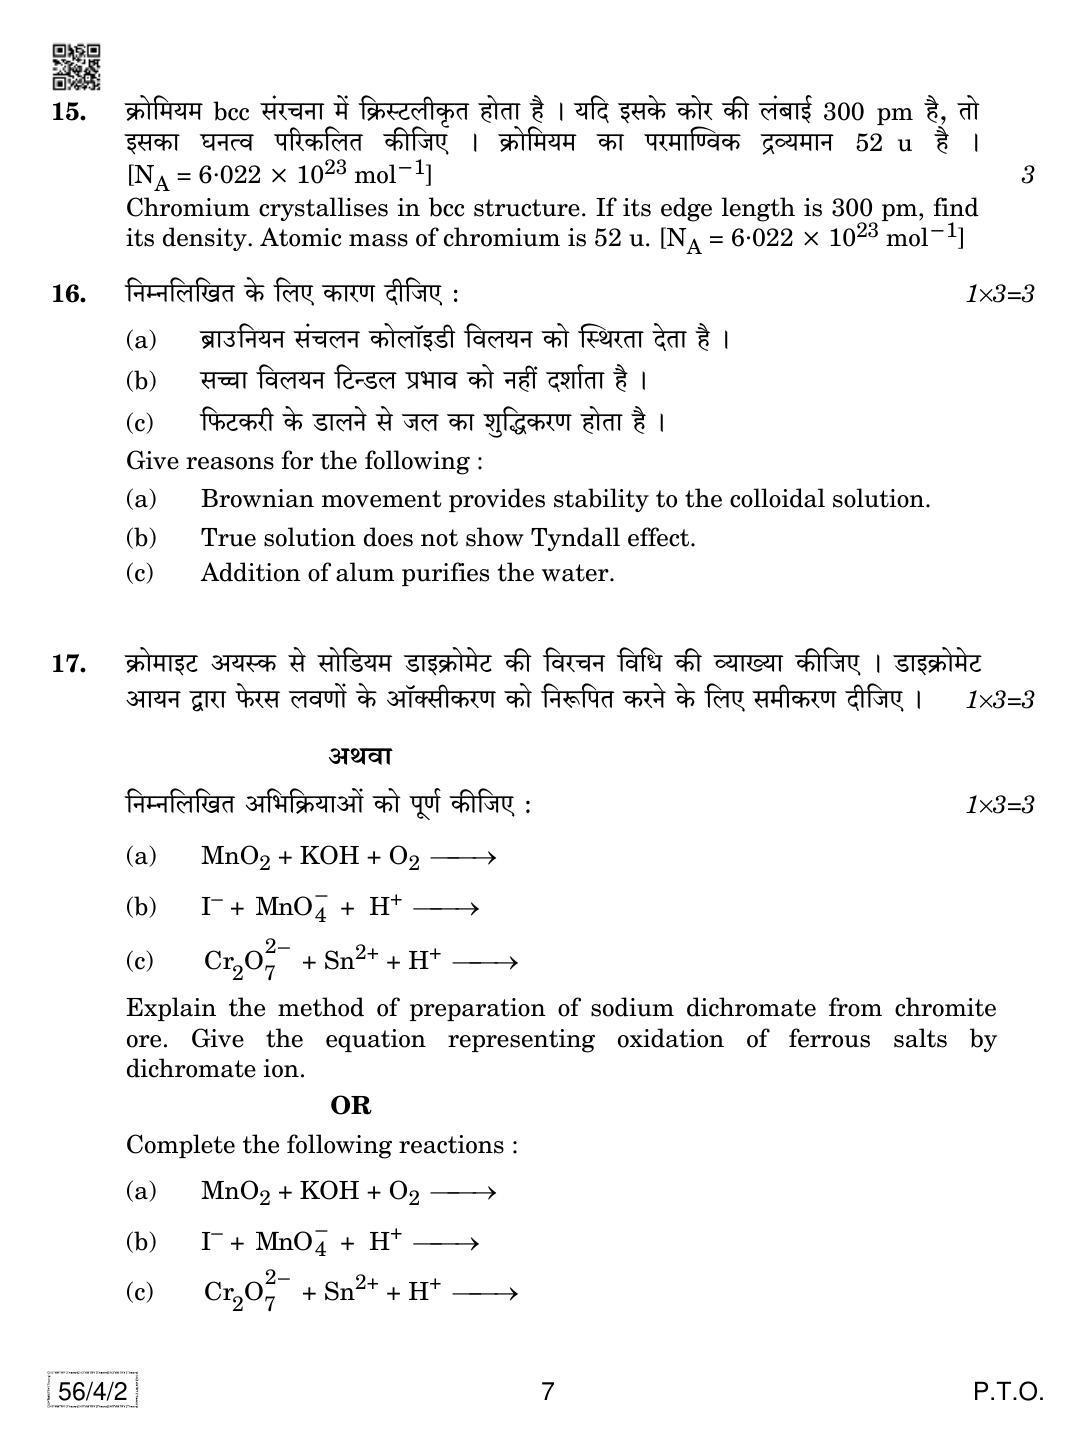 CBSE Class 12 56-4-2 Chemistry 2019 Question Paper - Page 7